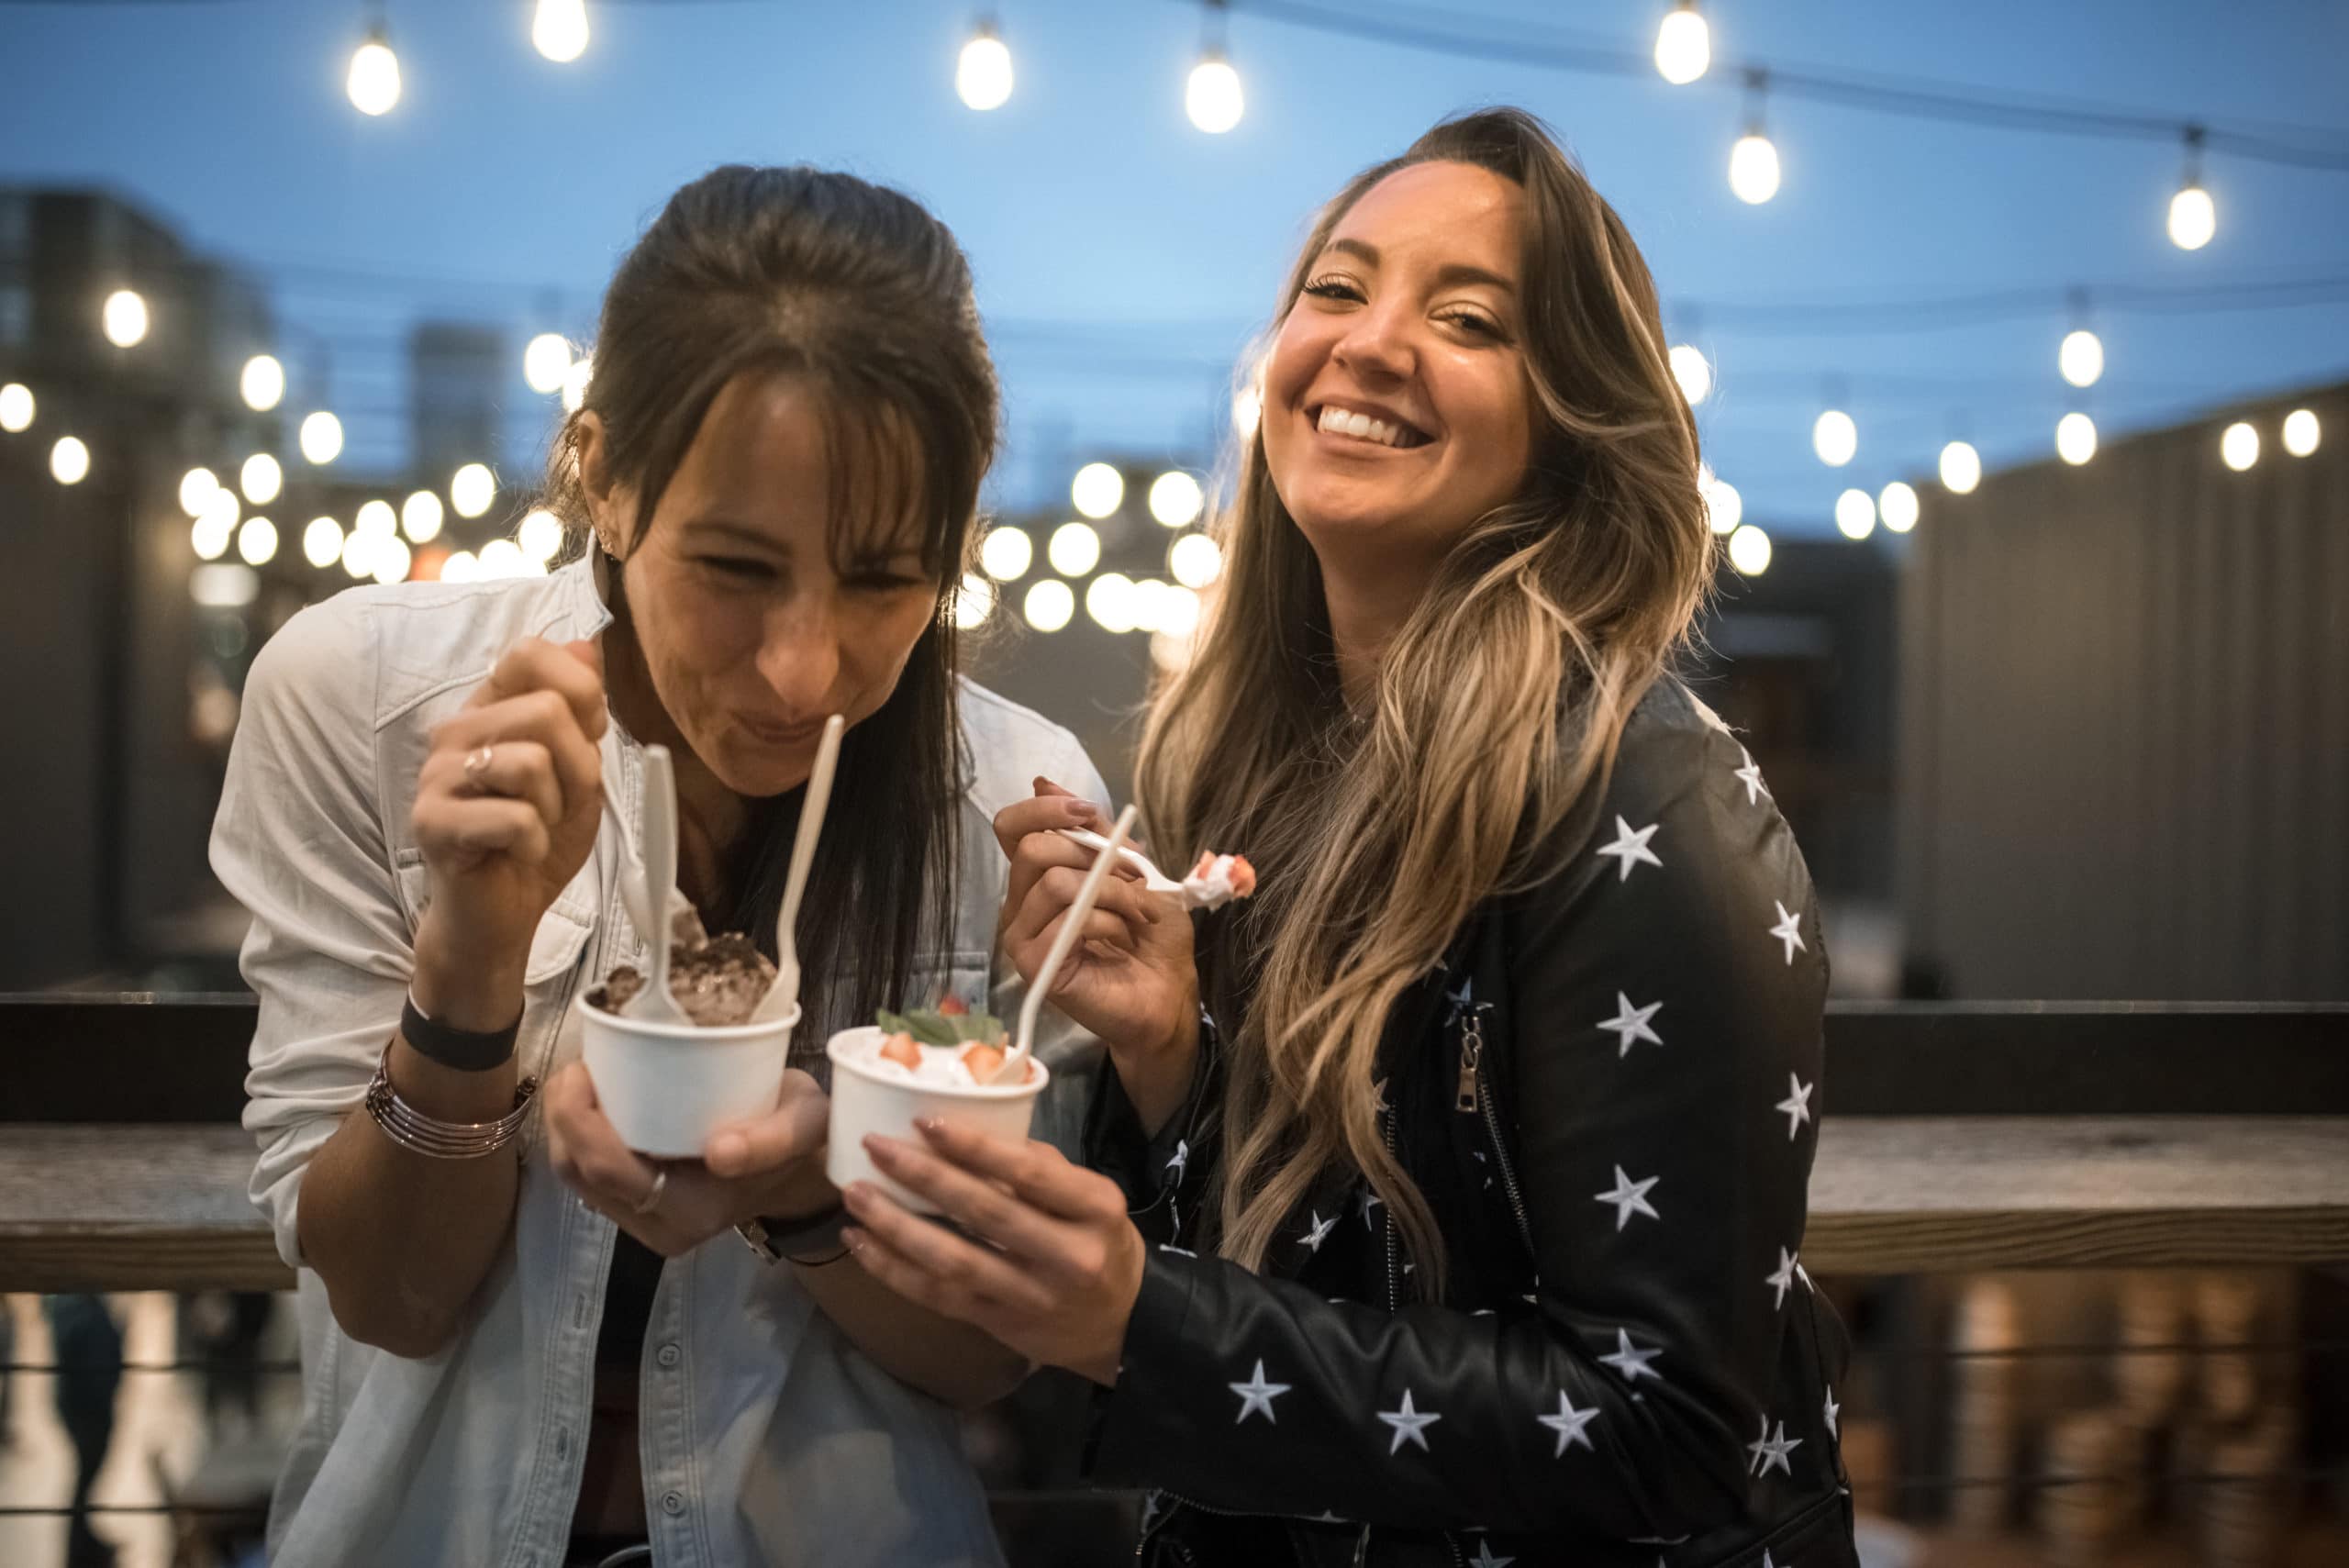 Bachelorette Party Ideas - Icecream at Shipping Co